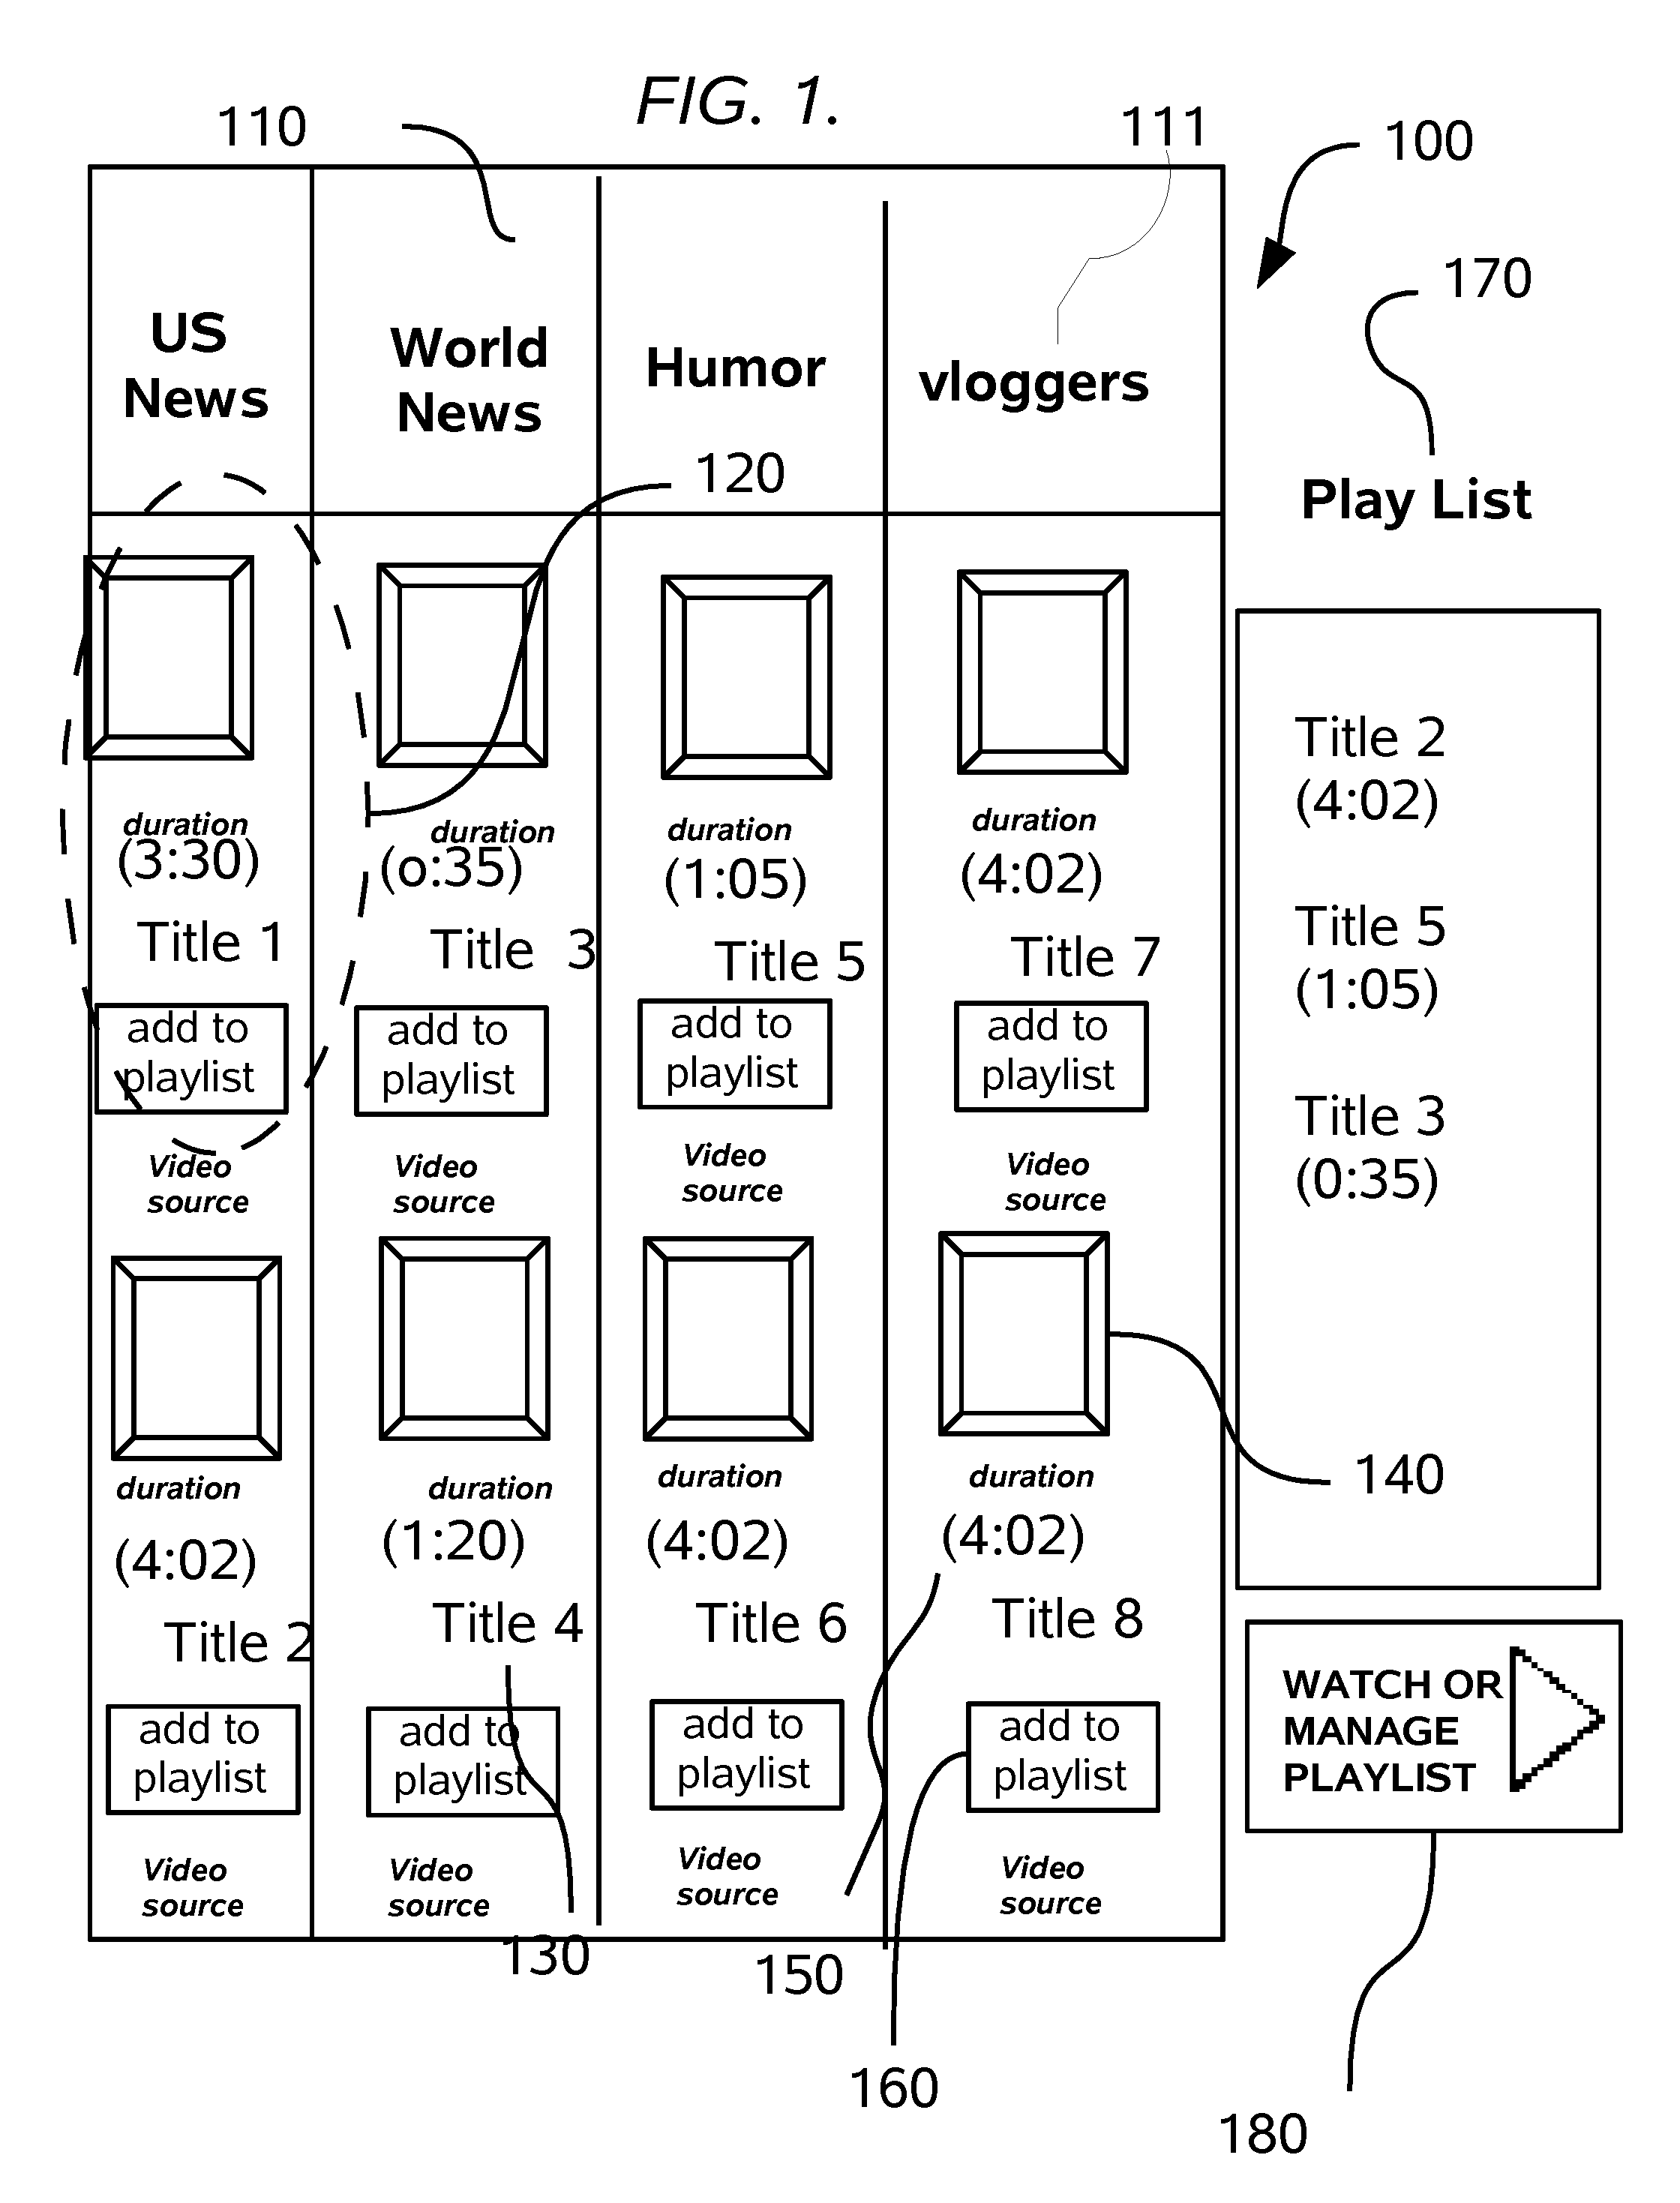 Method of Internet Video Access and Management